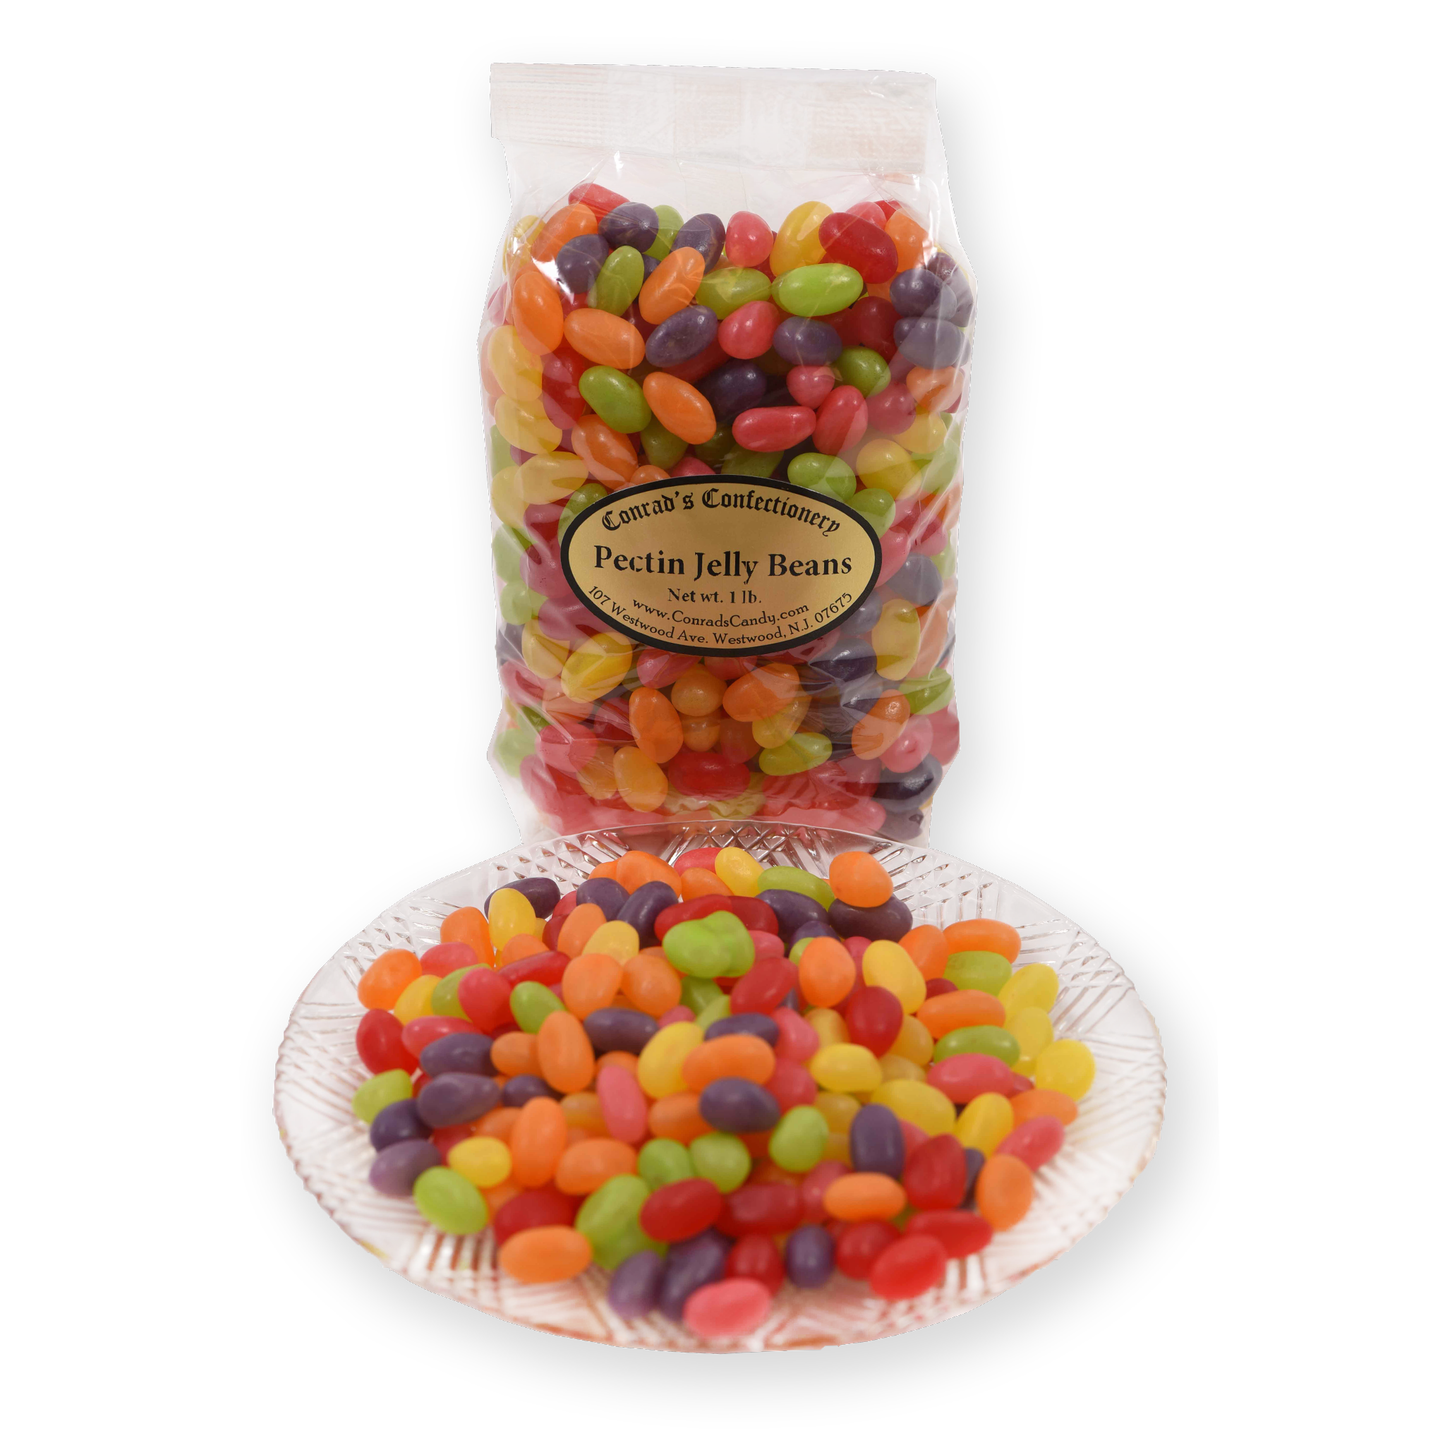 Jelly Belly ® Jelly Beans 1 lb.